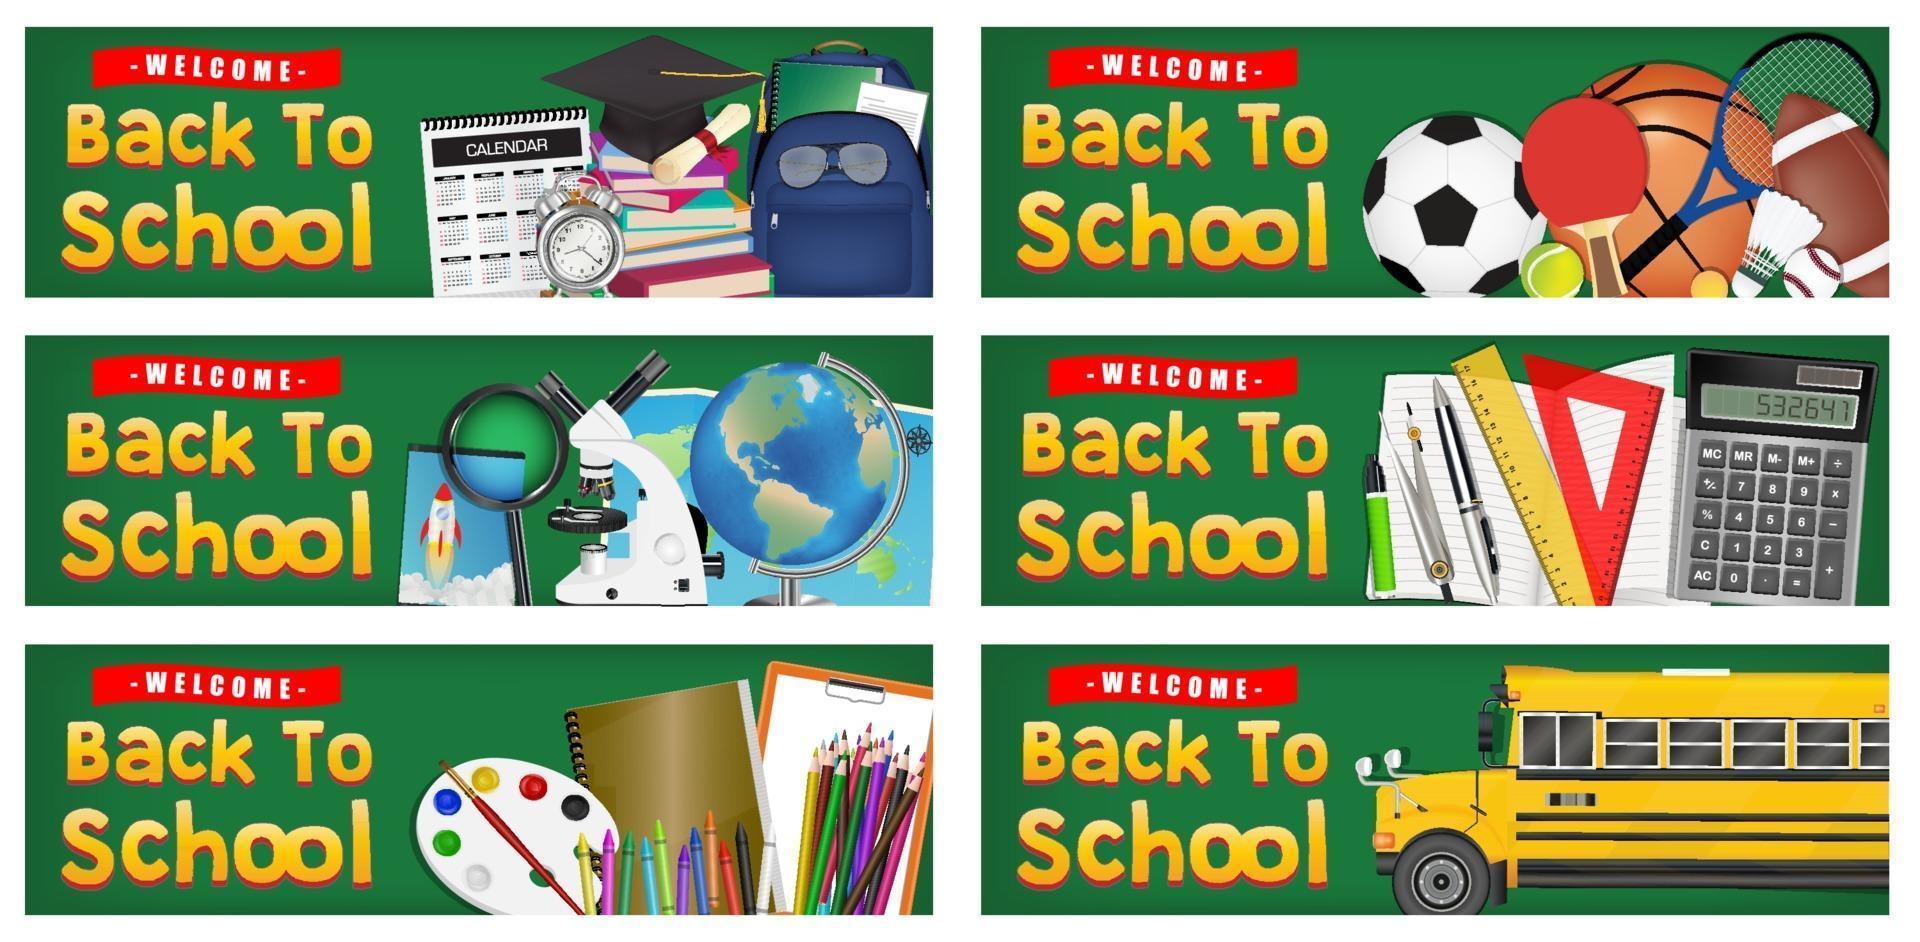 back to school study objects on chalkboard banner vector